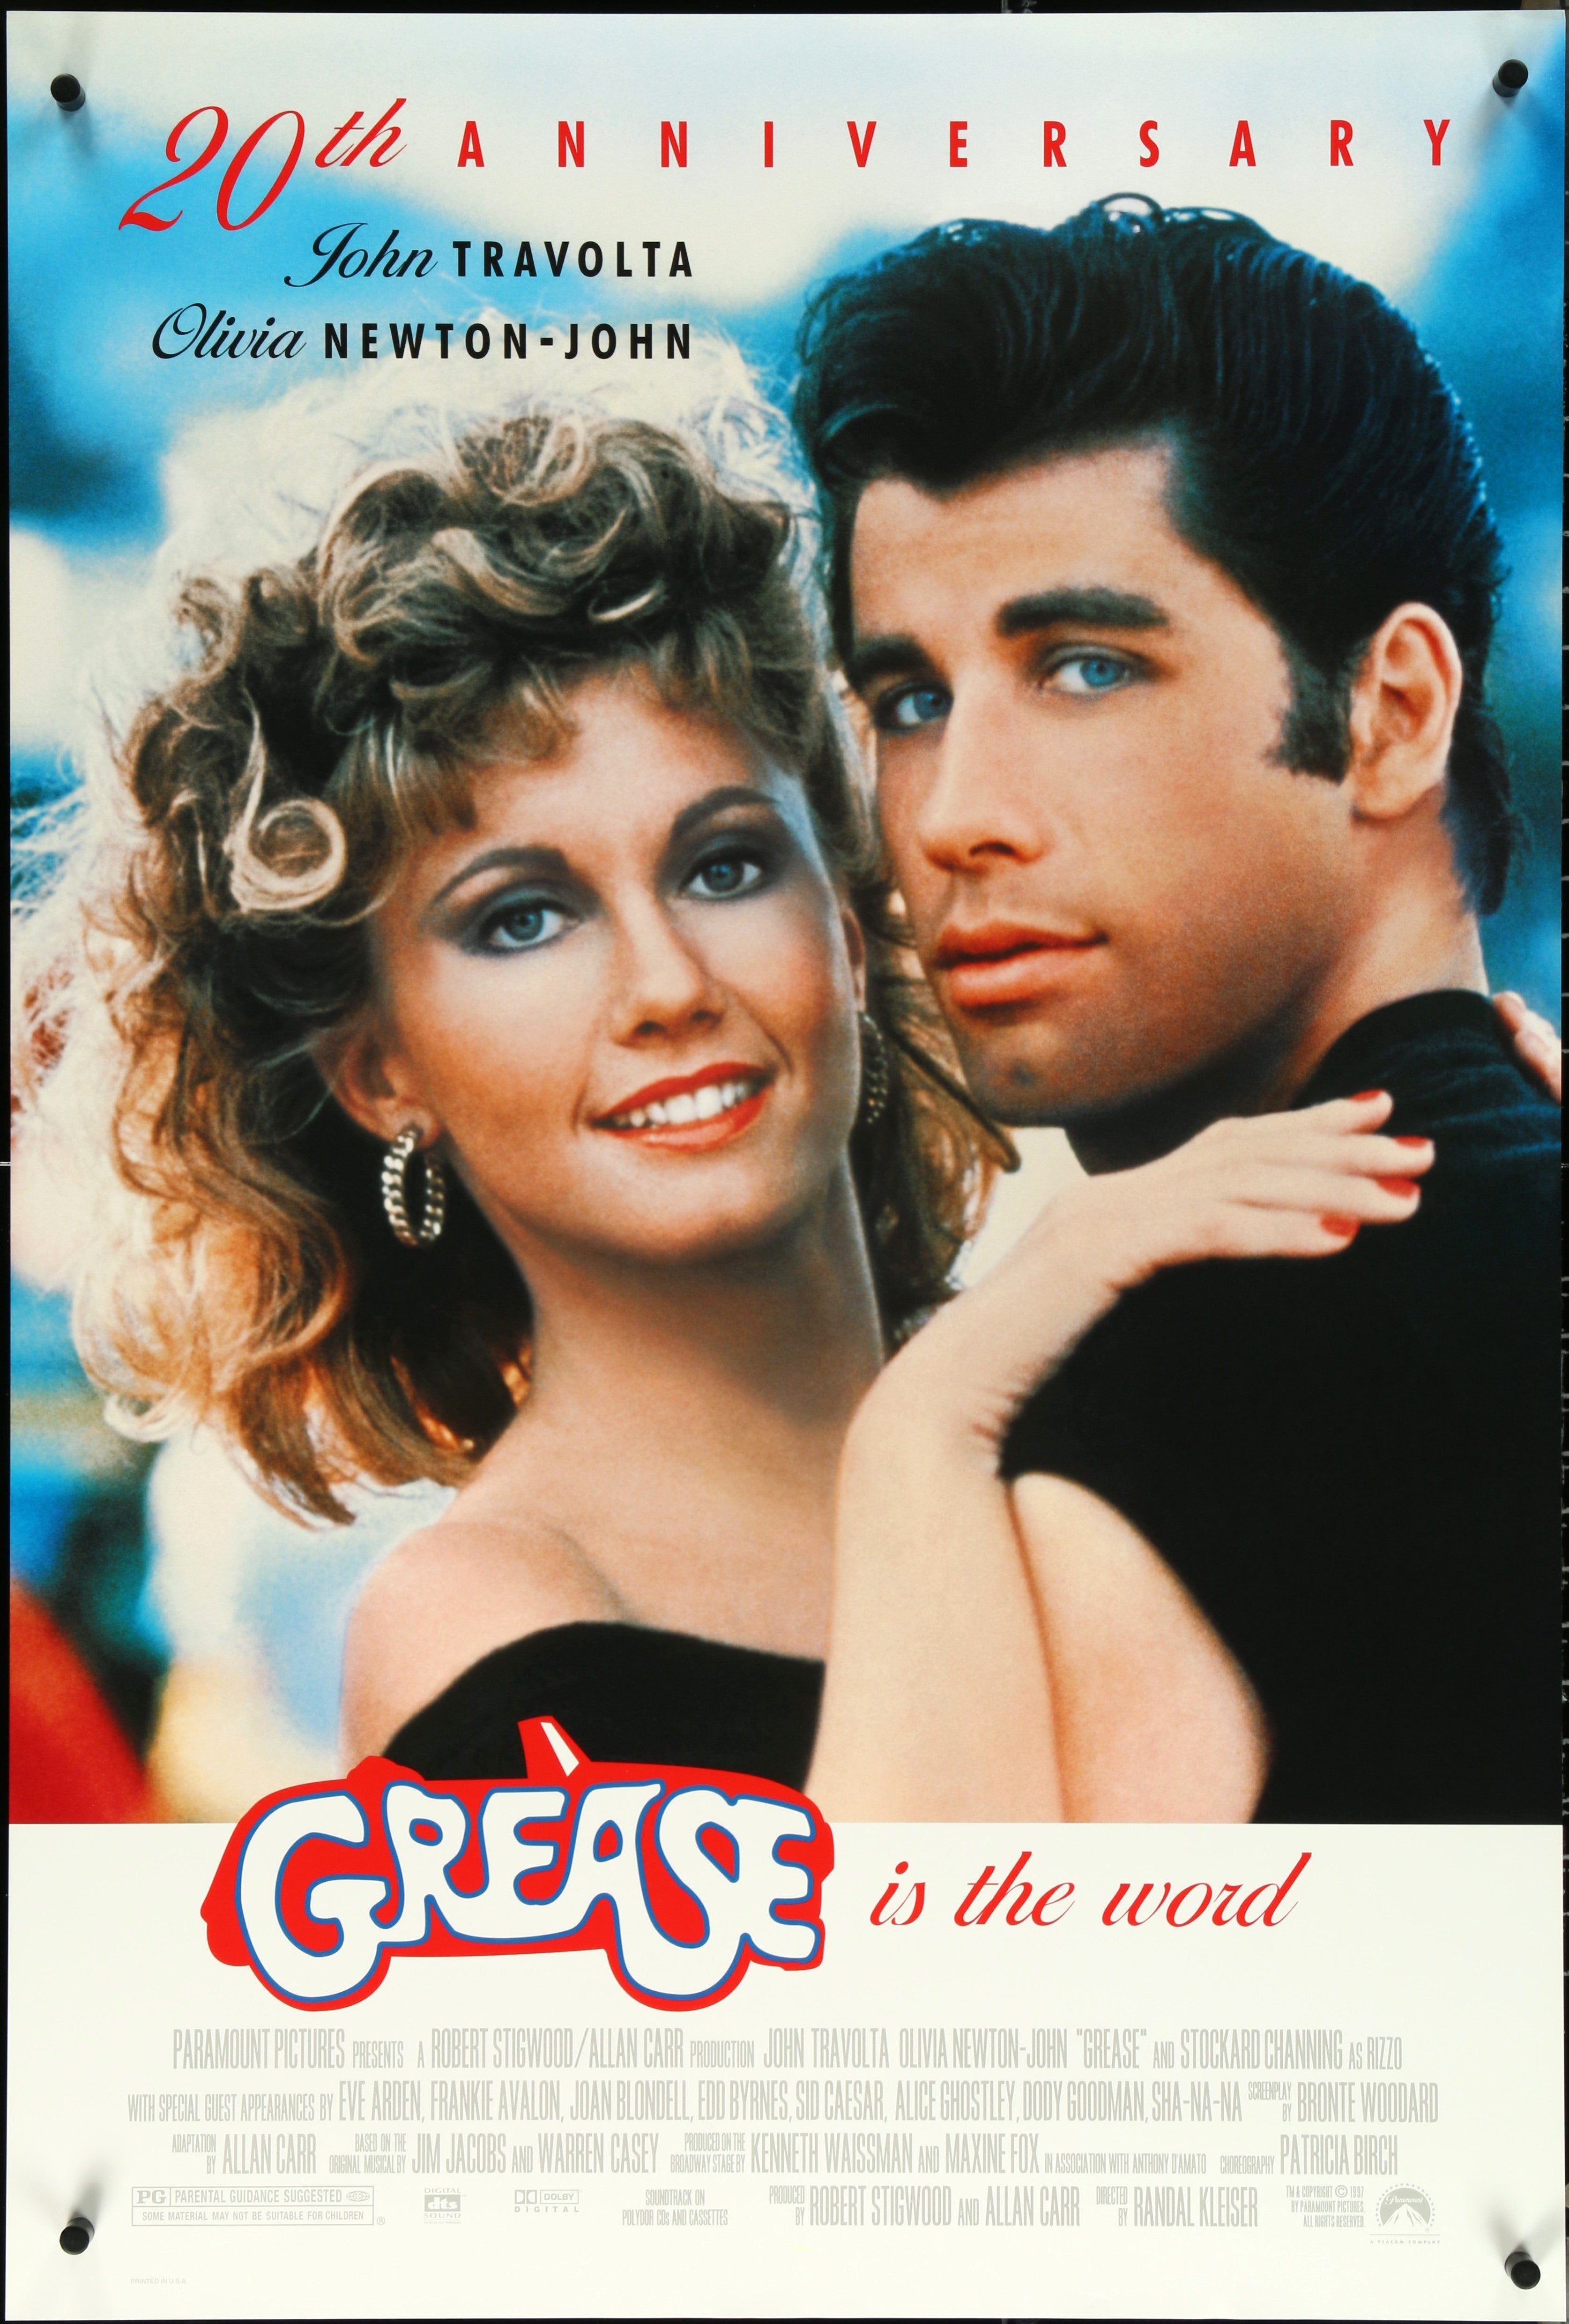 GREASE (R1998)